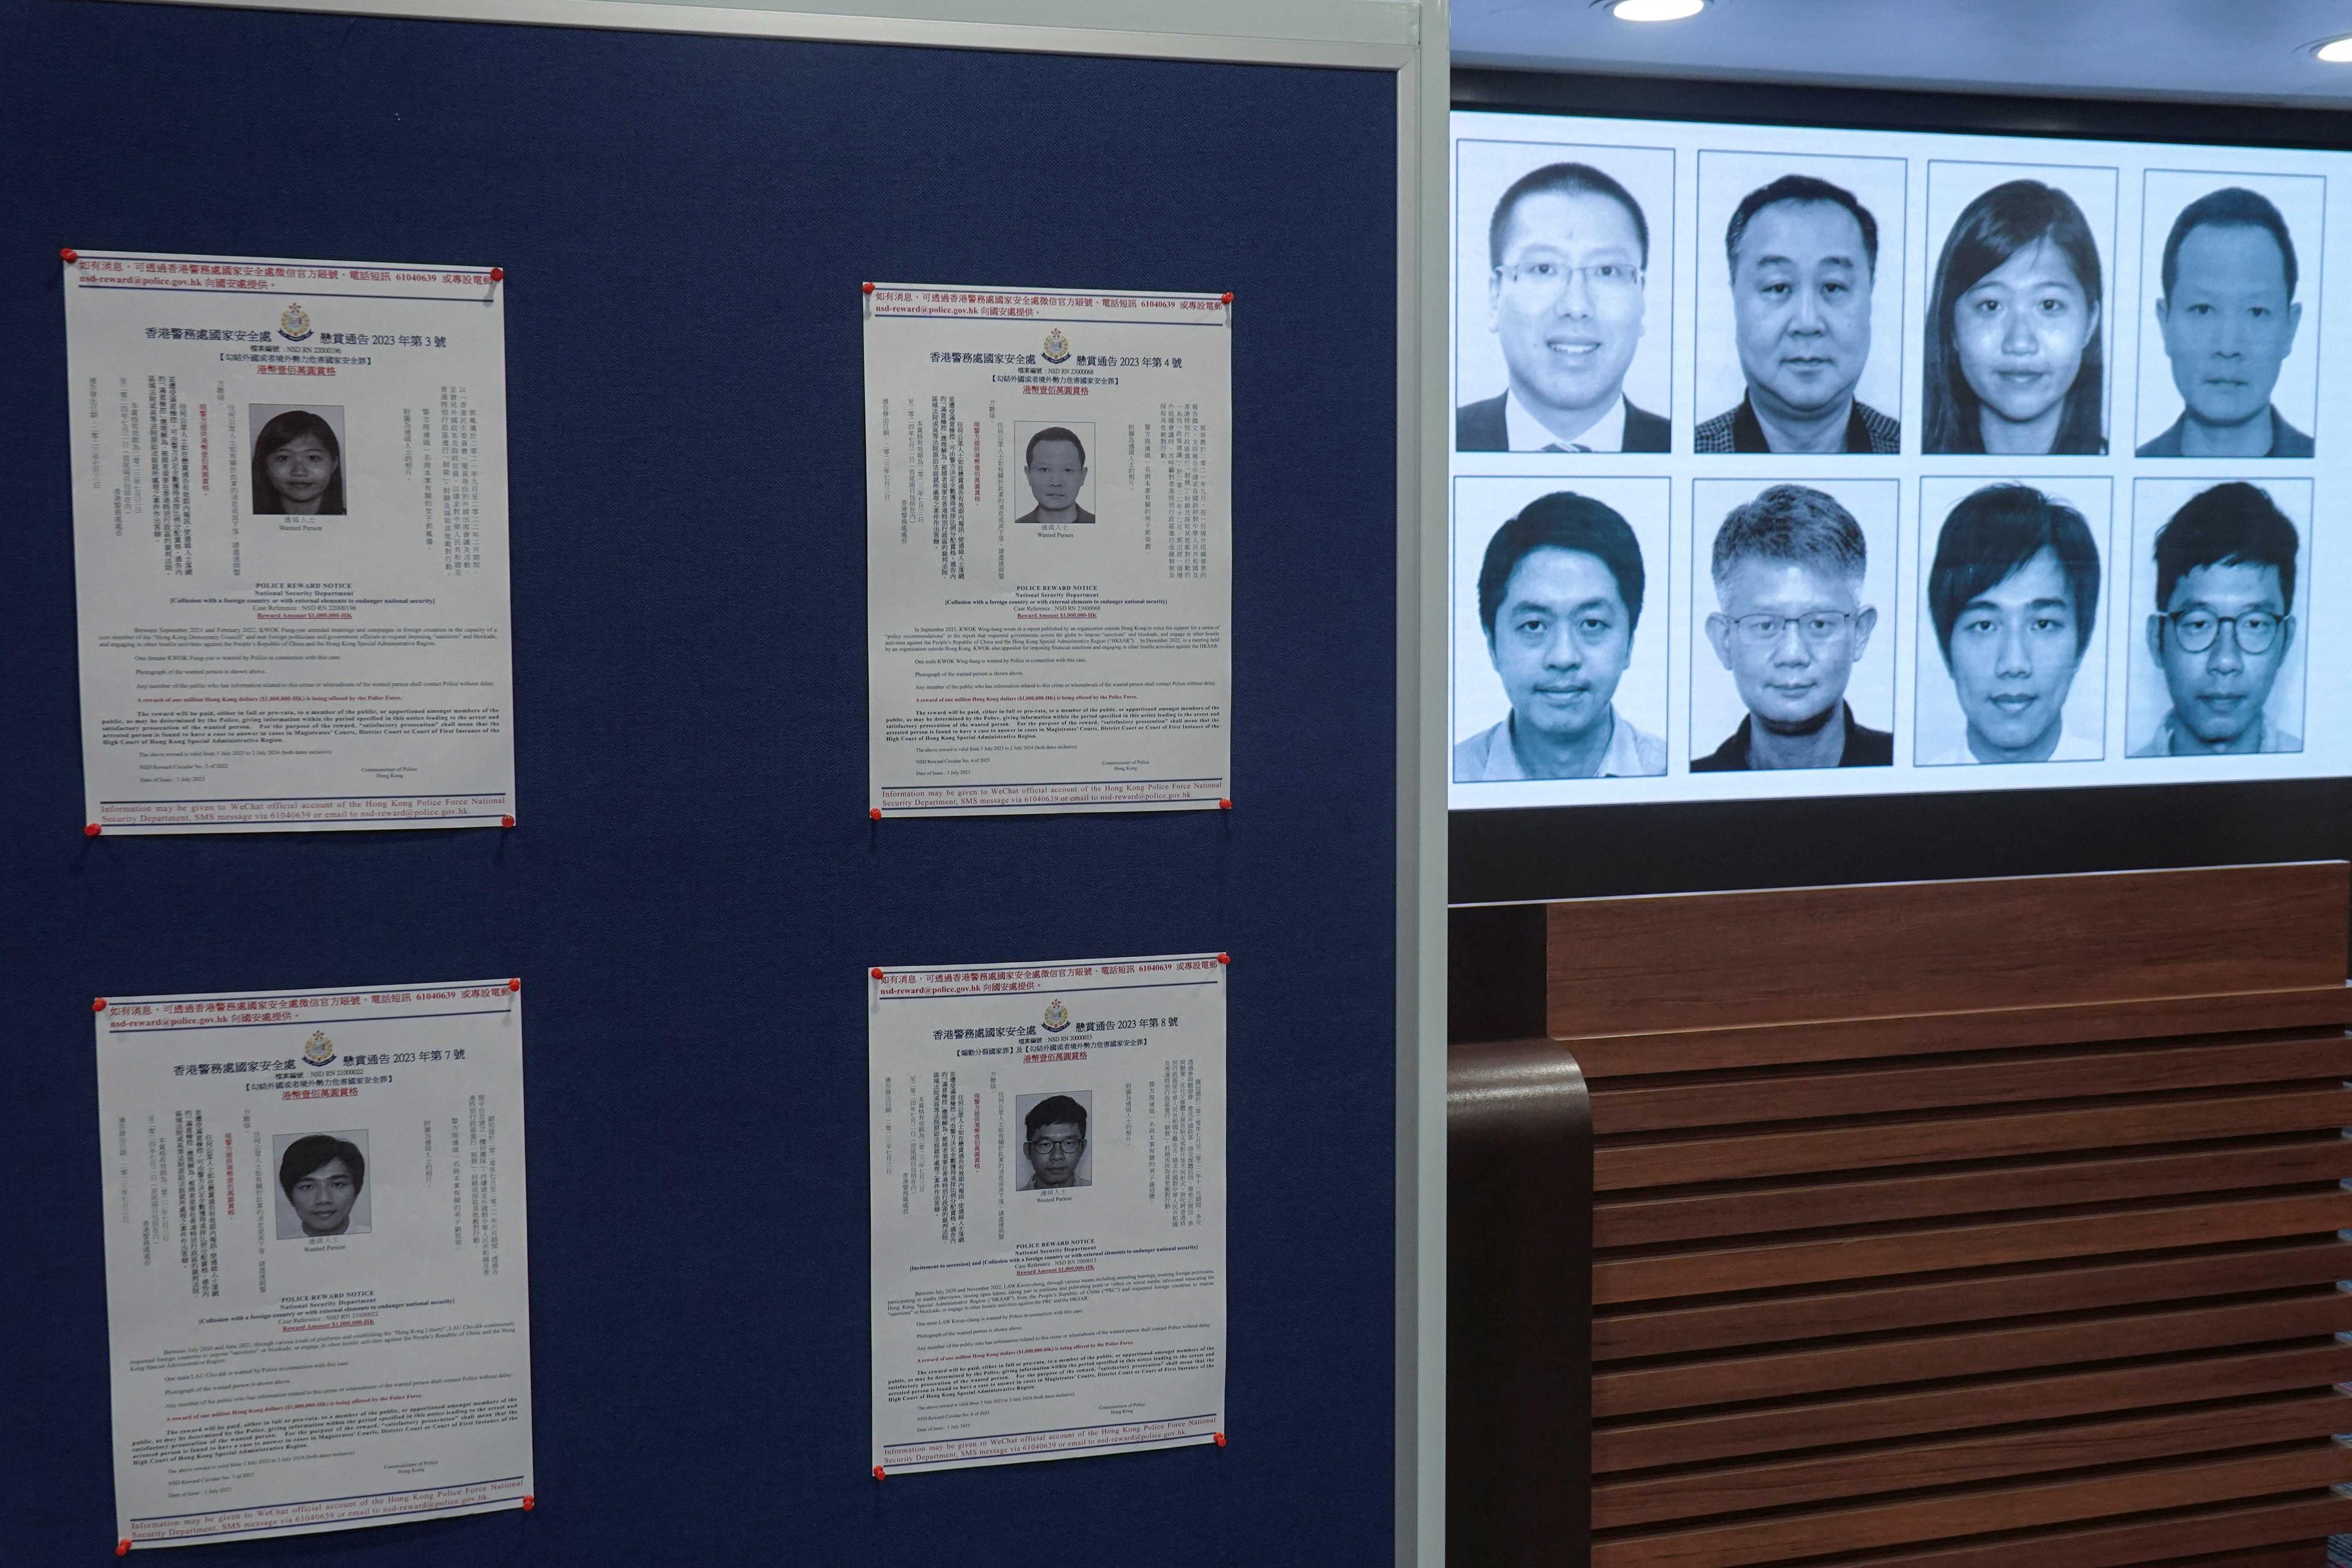 Photos of eight activists who have been issued arrest warrants over national security are displayed during a press conference in Hong Kong, China July 3. Photo: Reuters